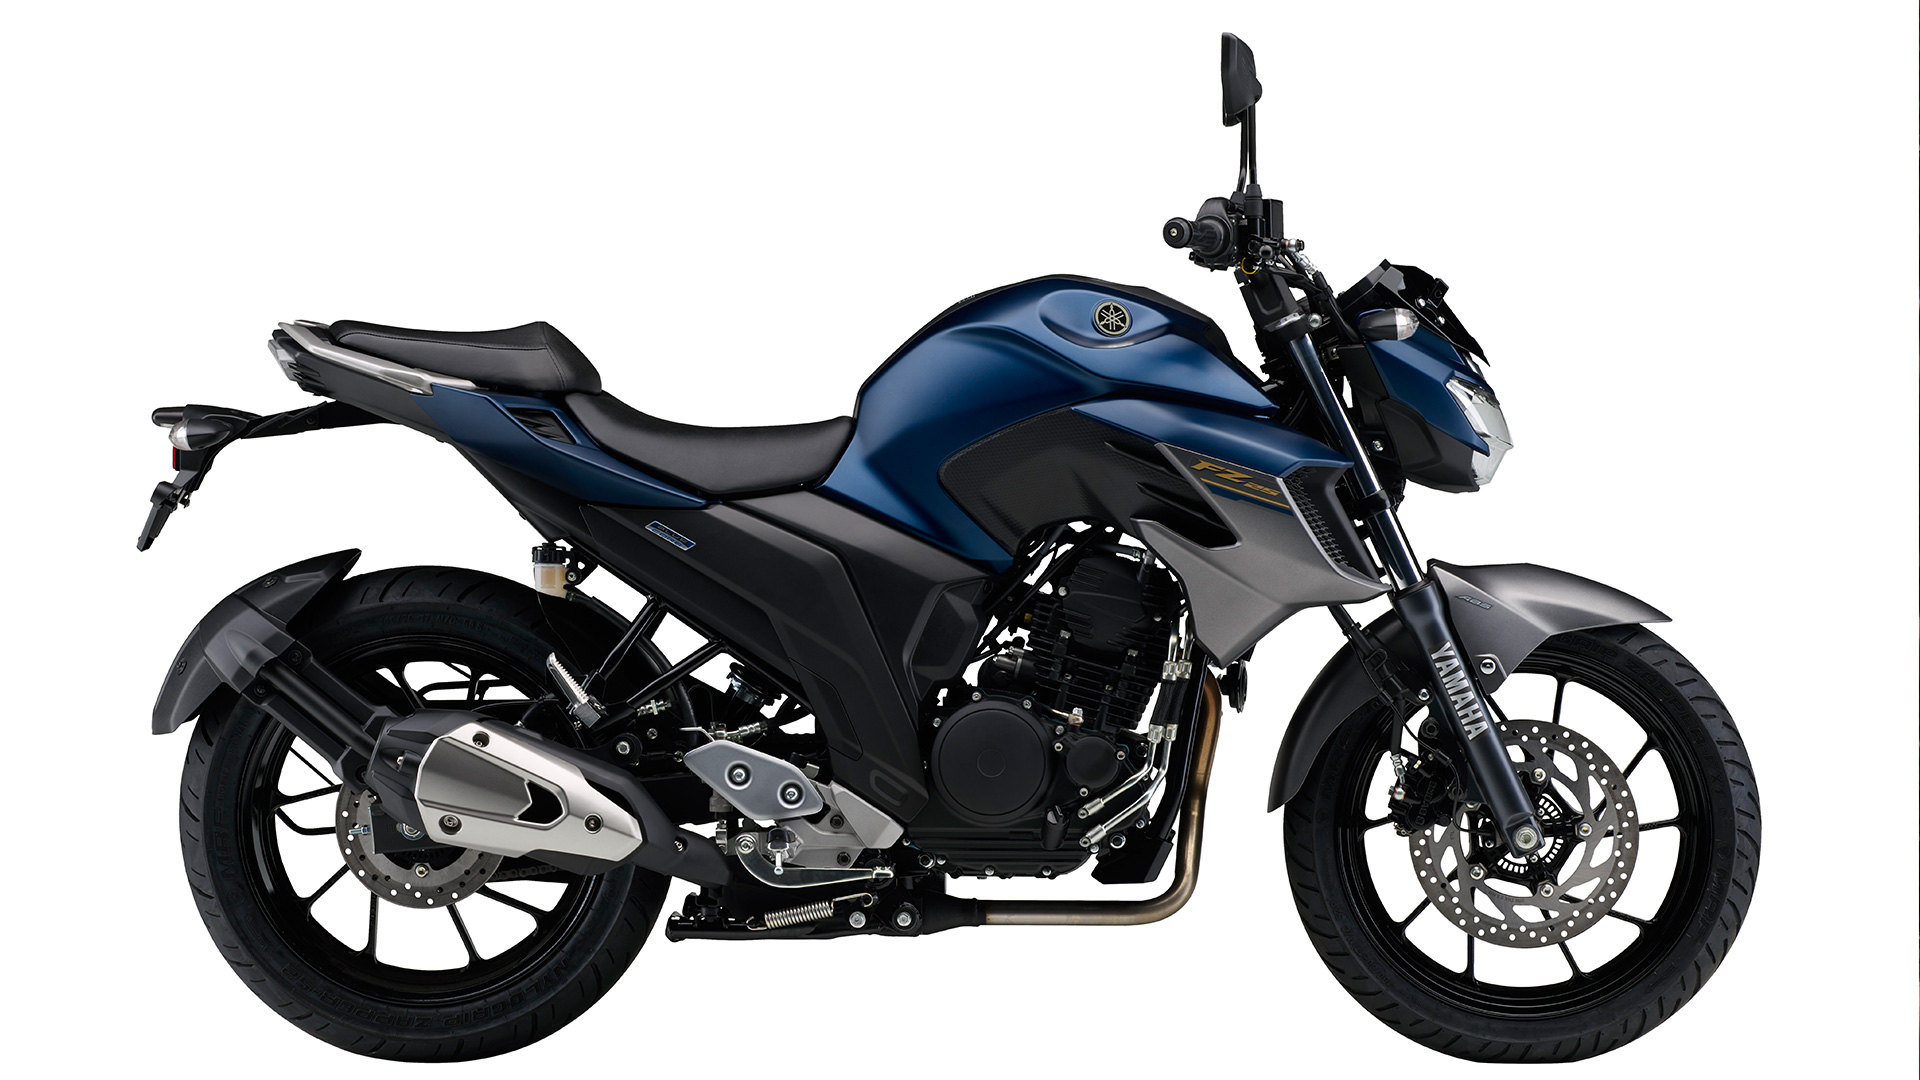 Yamaha Fz 25 2019 Abs Price Mileage Reviews Specification